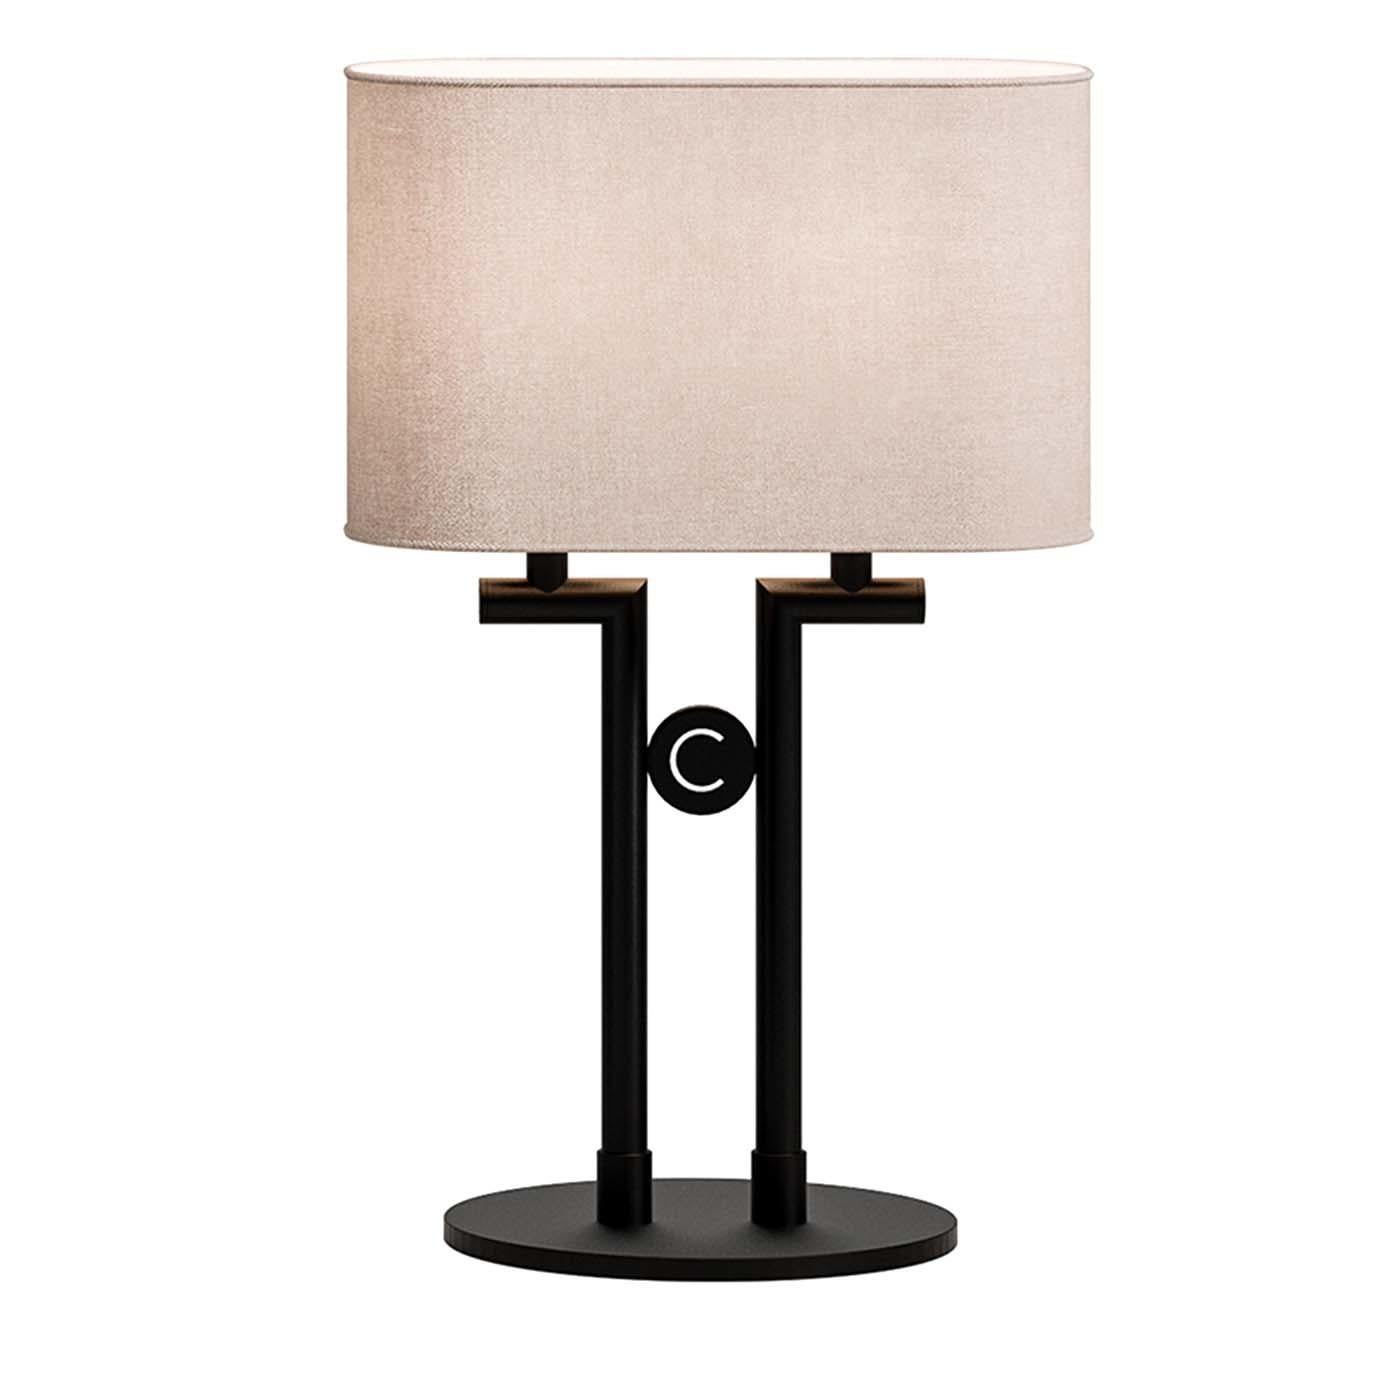 Sleek and refined, this table lamp merges contemporary and traditional styles in a striking silhouette that will stand out in any interior. The captivating base is crafted of metal with a black finish and is made of a round plate with two